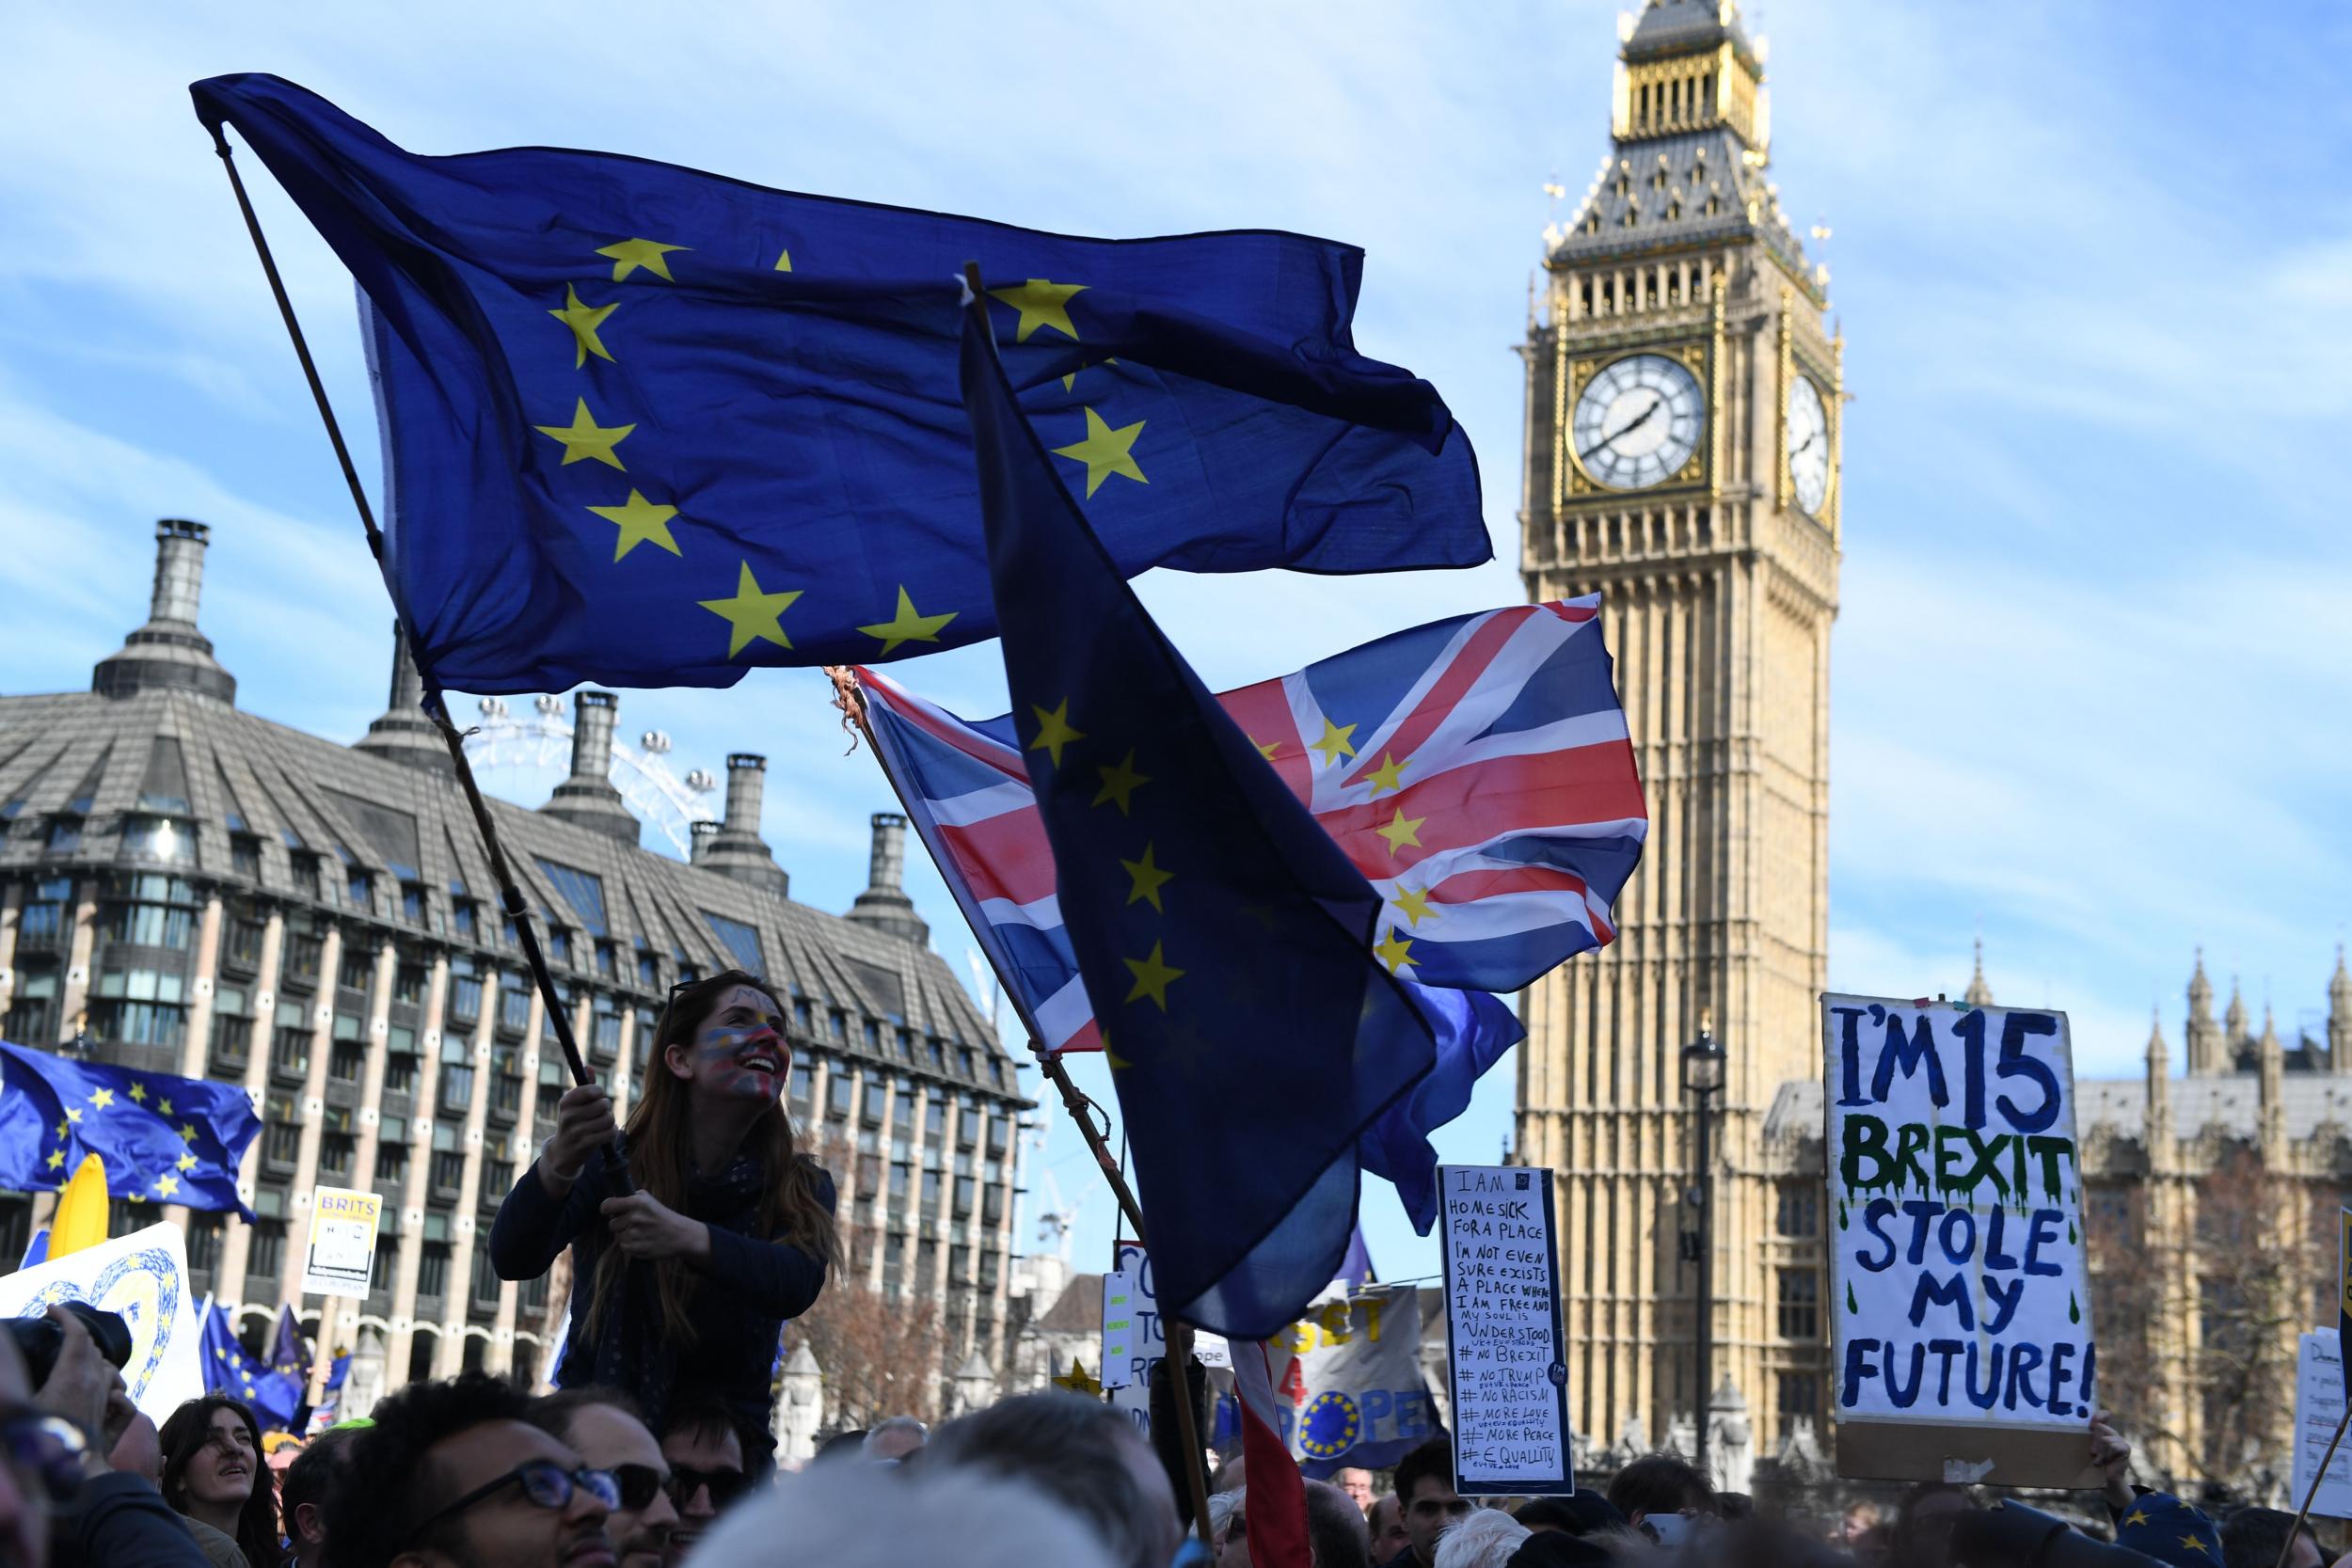 Thousands gathered in Parliament Square for a pro-EU march on Saturday